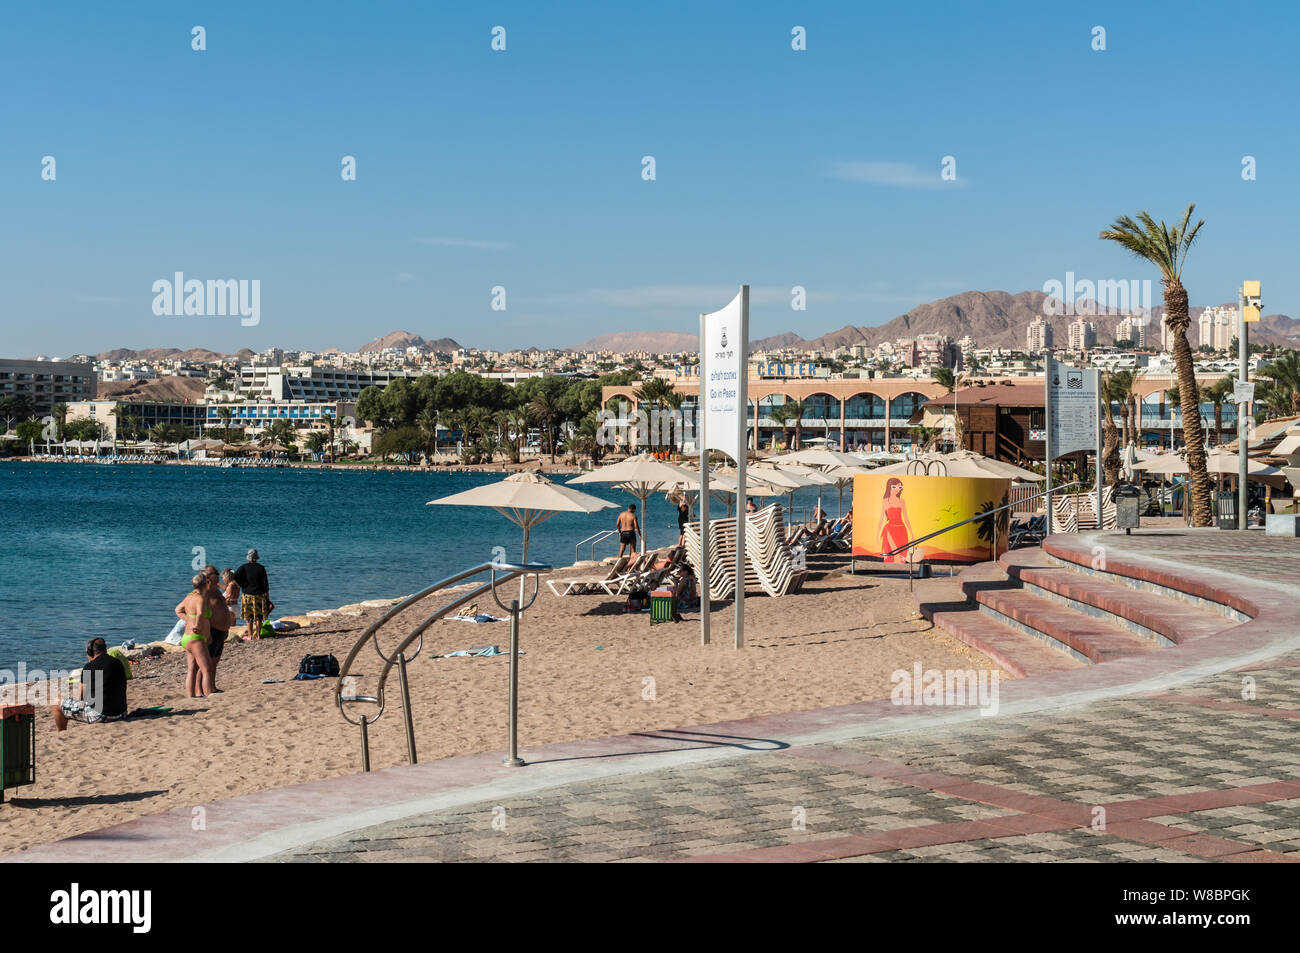 Eilat, Israel- November 7, 2017:   City promenade with palm trees and beach equipped with sunbeds and umbrellas. In the background city buildings and Stock Photo